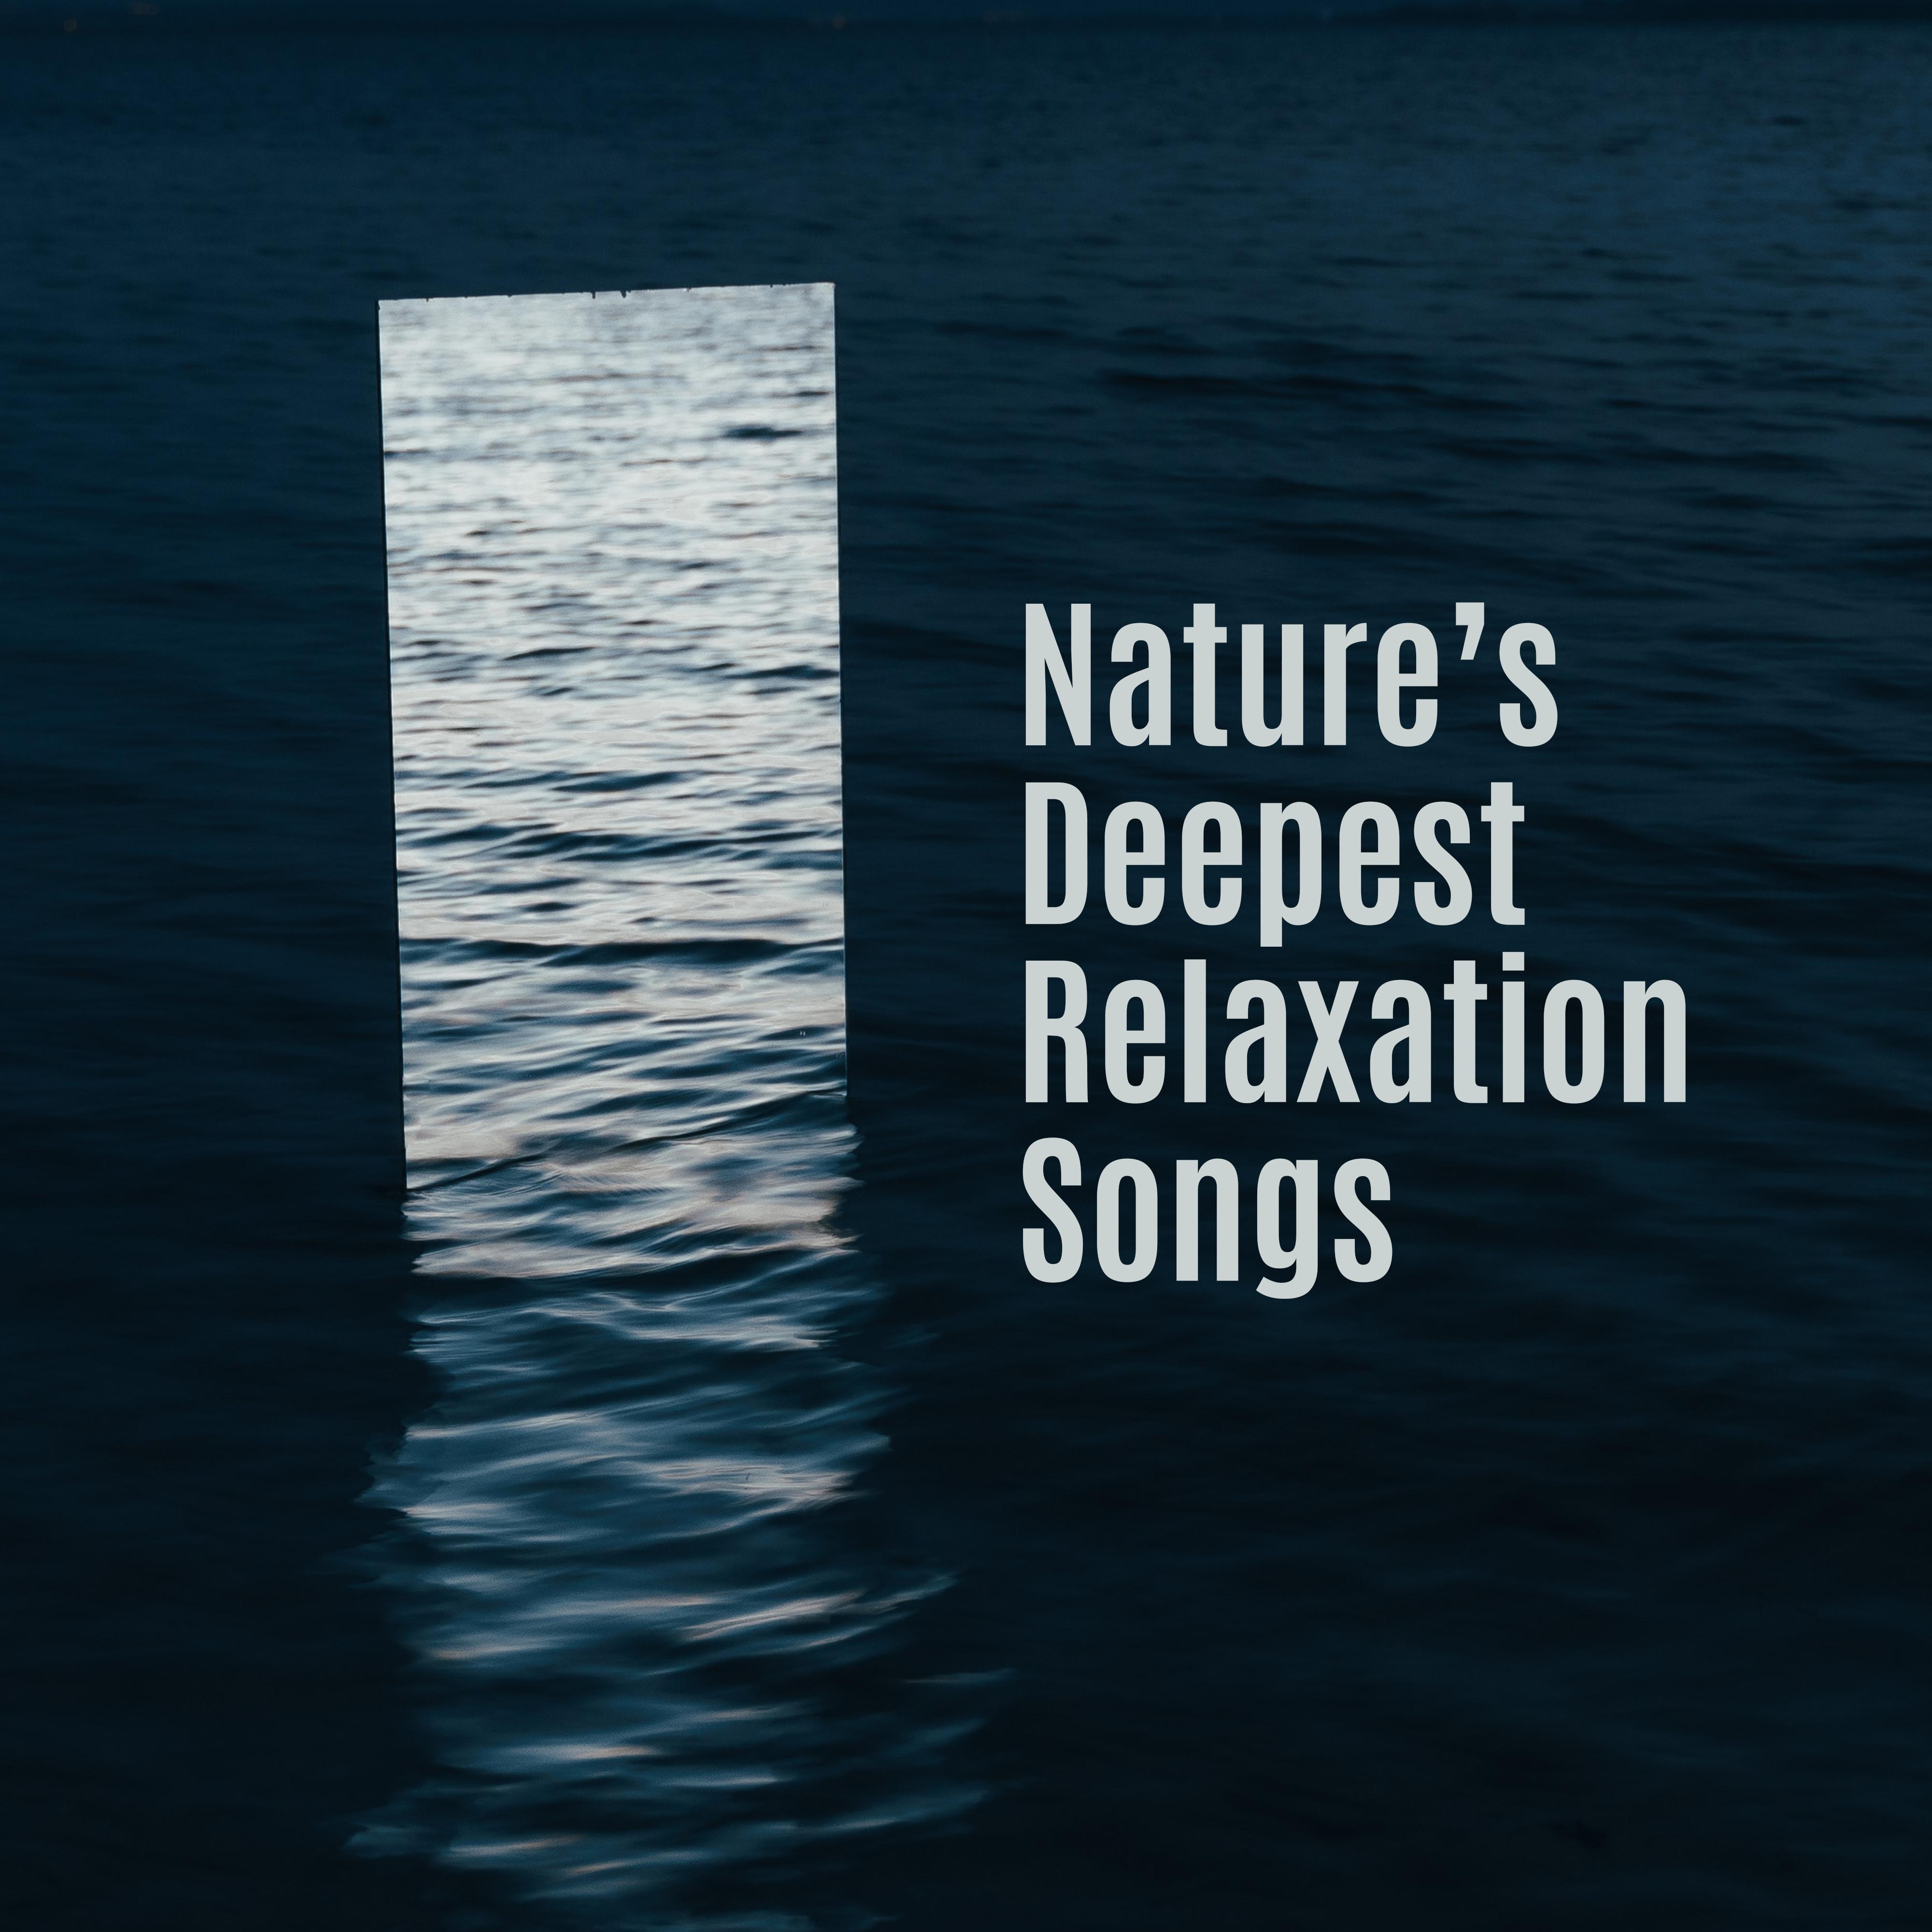 Nature' s Deepest Relaxation Songs  2019 New Age Beautiful Piano Melodies with Nature Sounds of Birds, Forest, Water  More, Music for Relax, Deep Sleep, Calm Down, Rest After Work